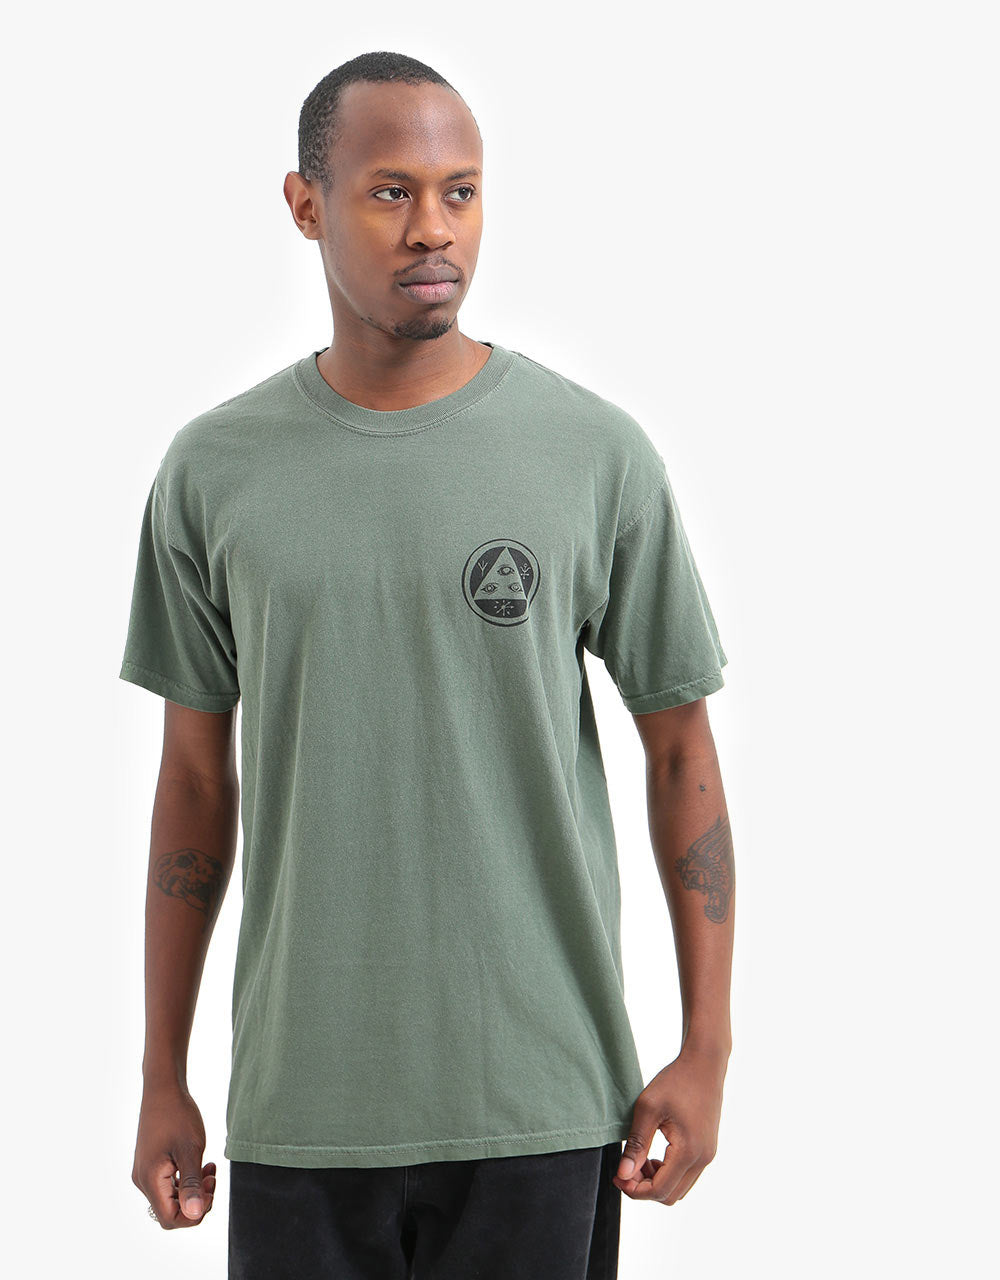 Welcome The Magician Garment-Dyed T-Shirt - Moss